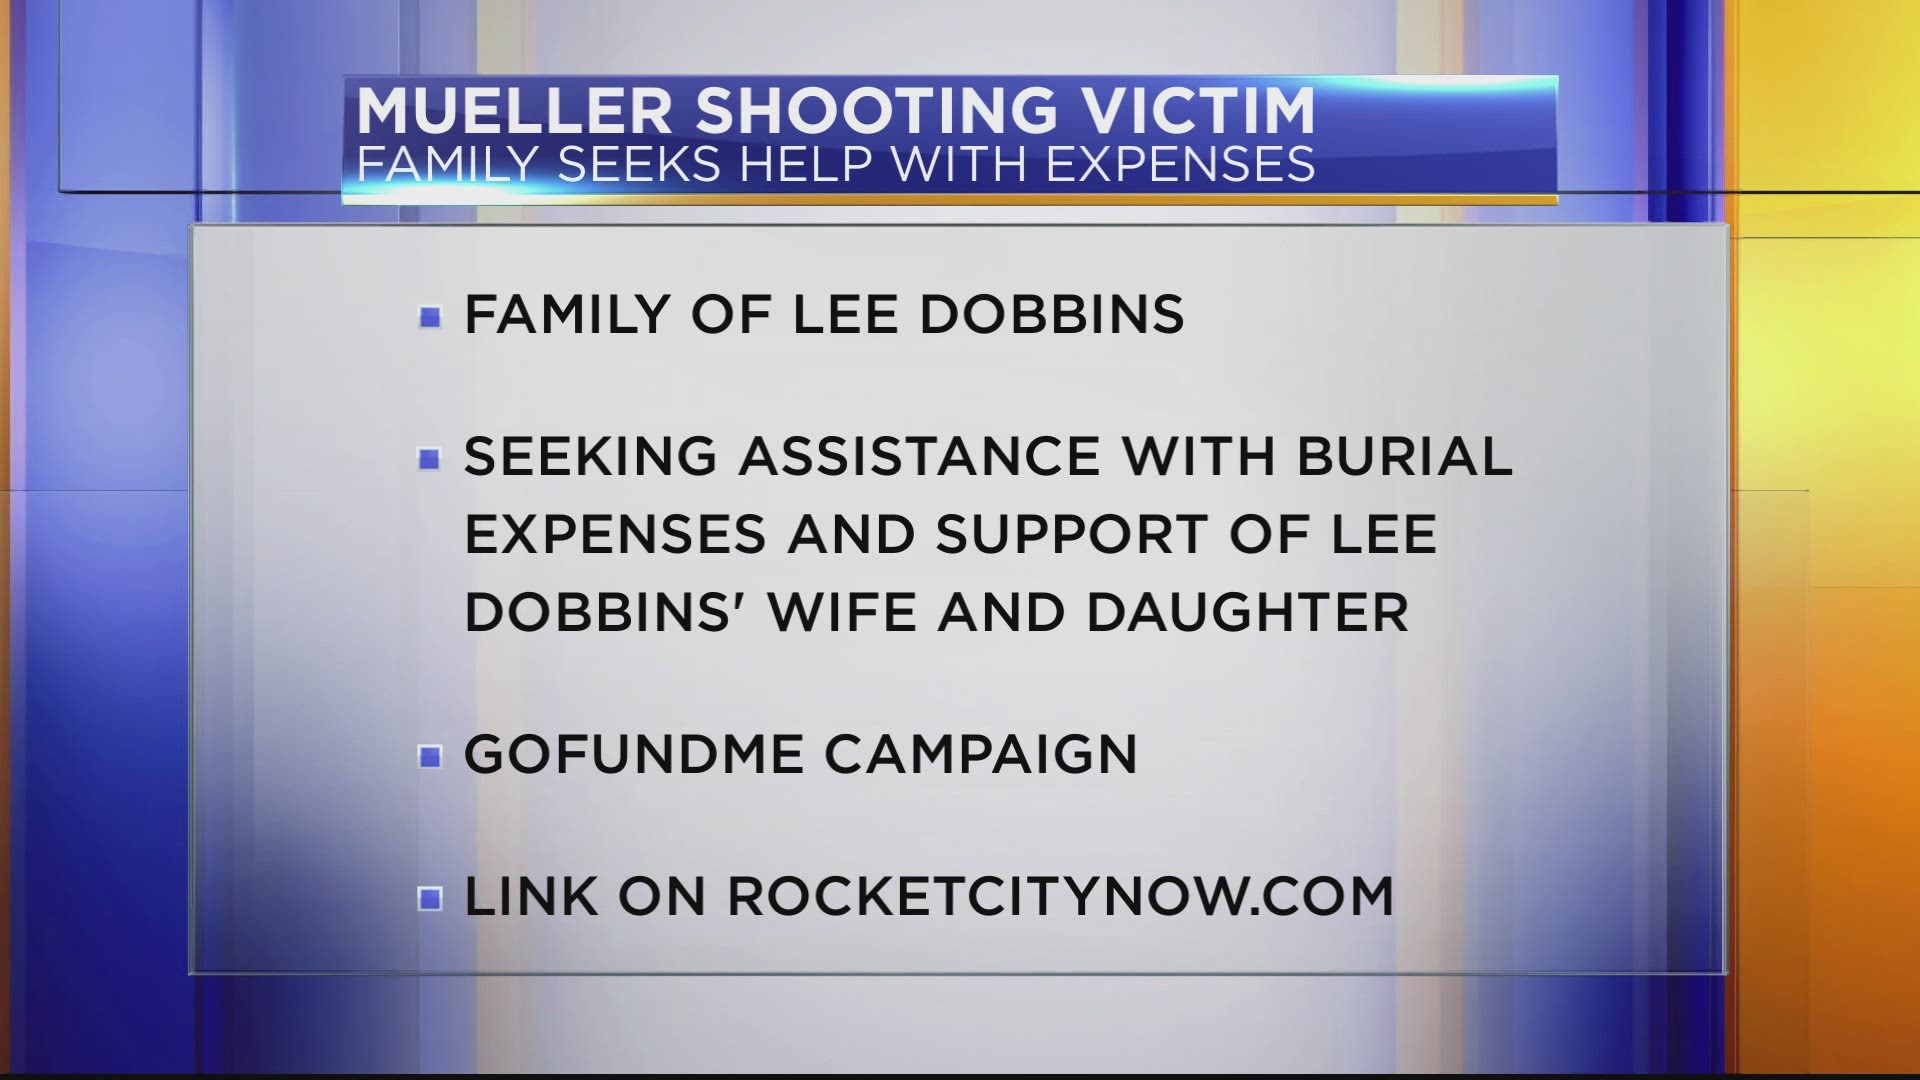 Lee Dobbins was one of the victims in a workplace shooting at the Mueller Company plant in Albertville, AL.